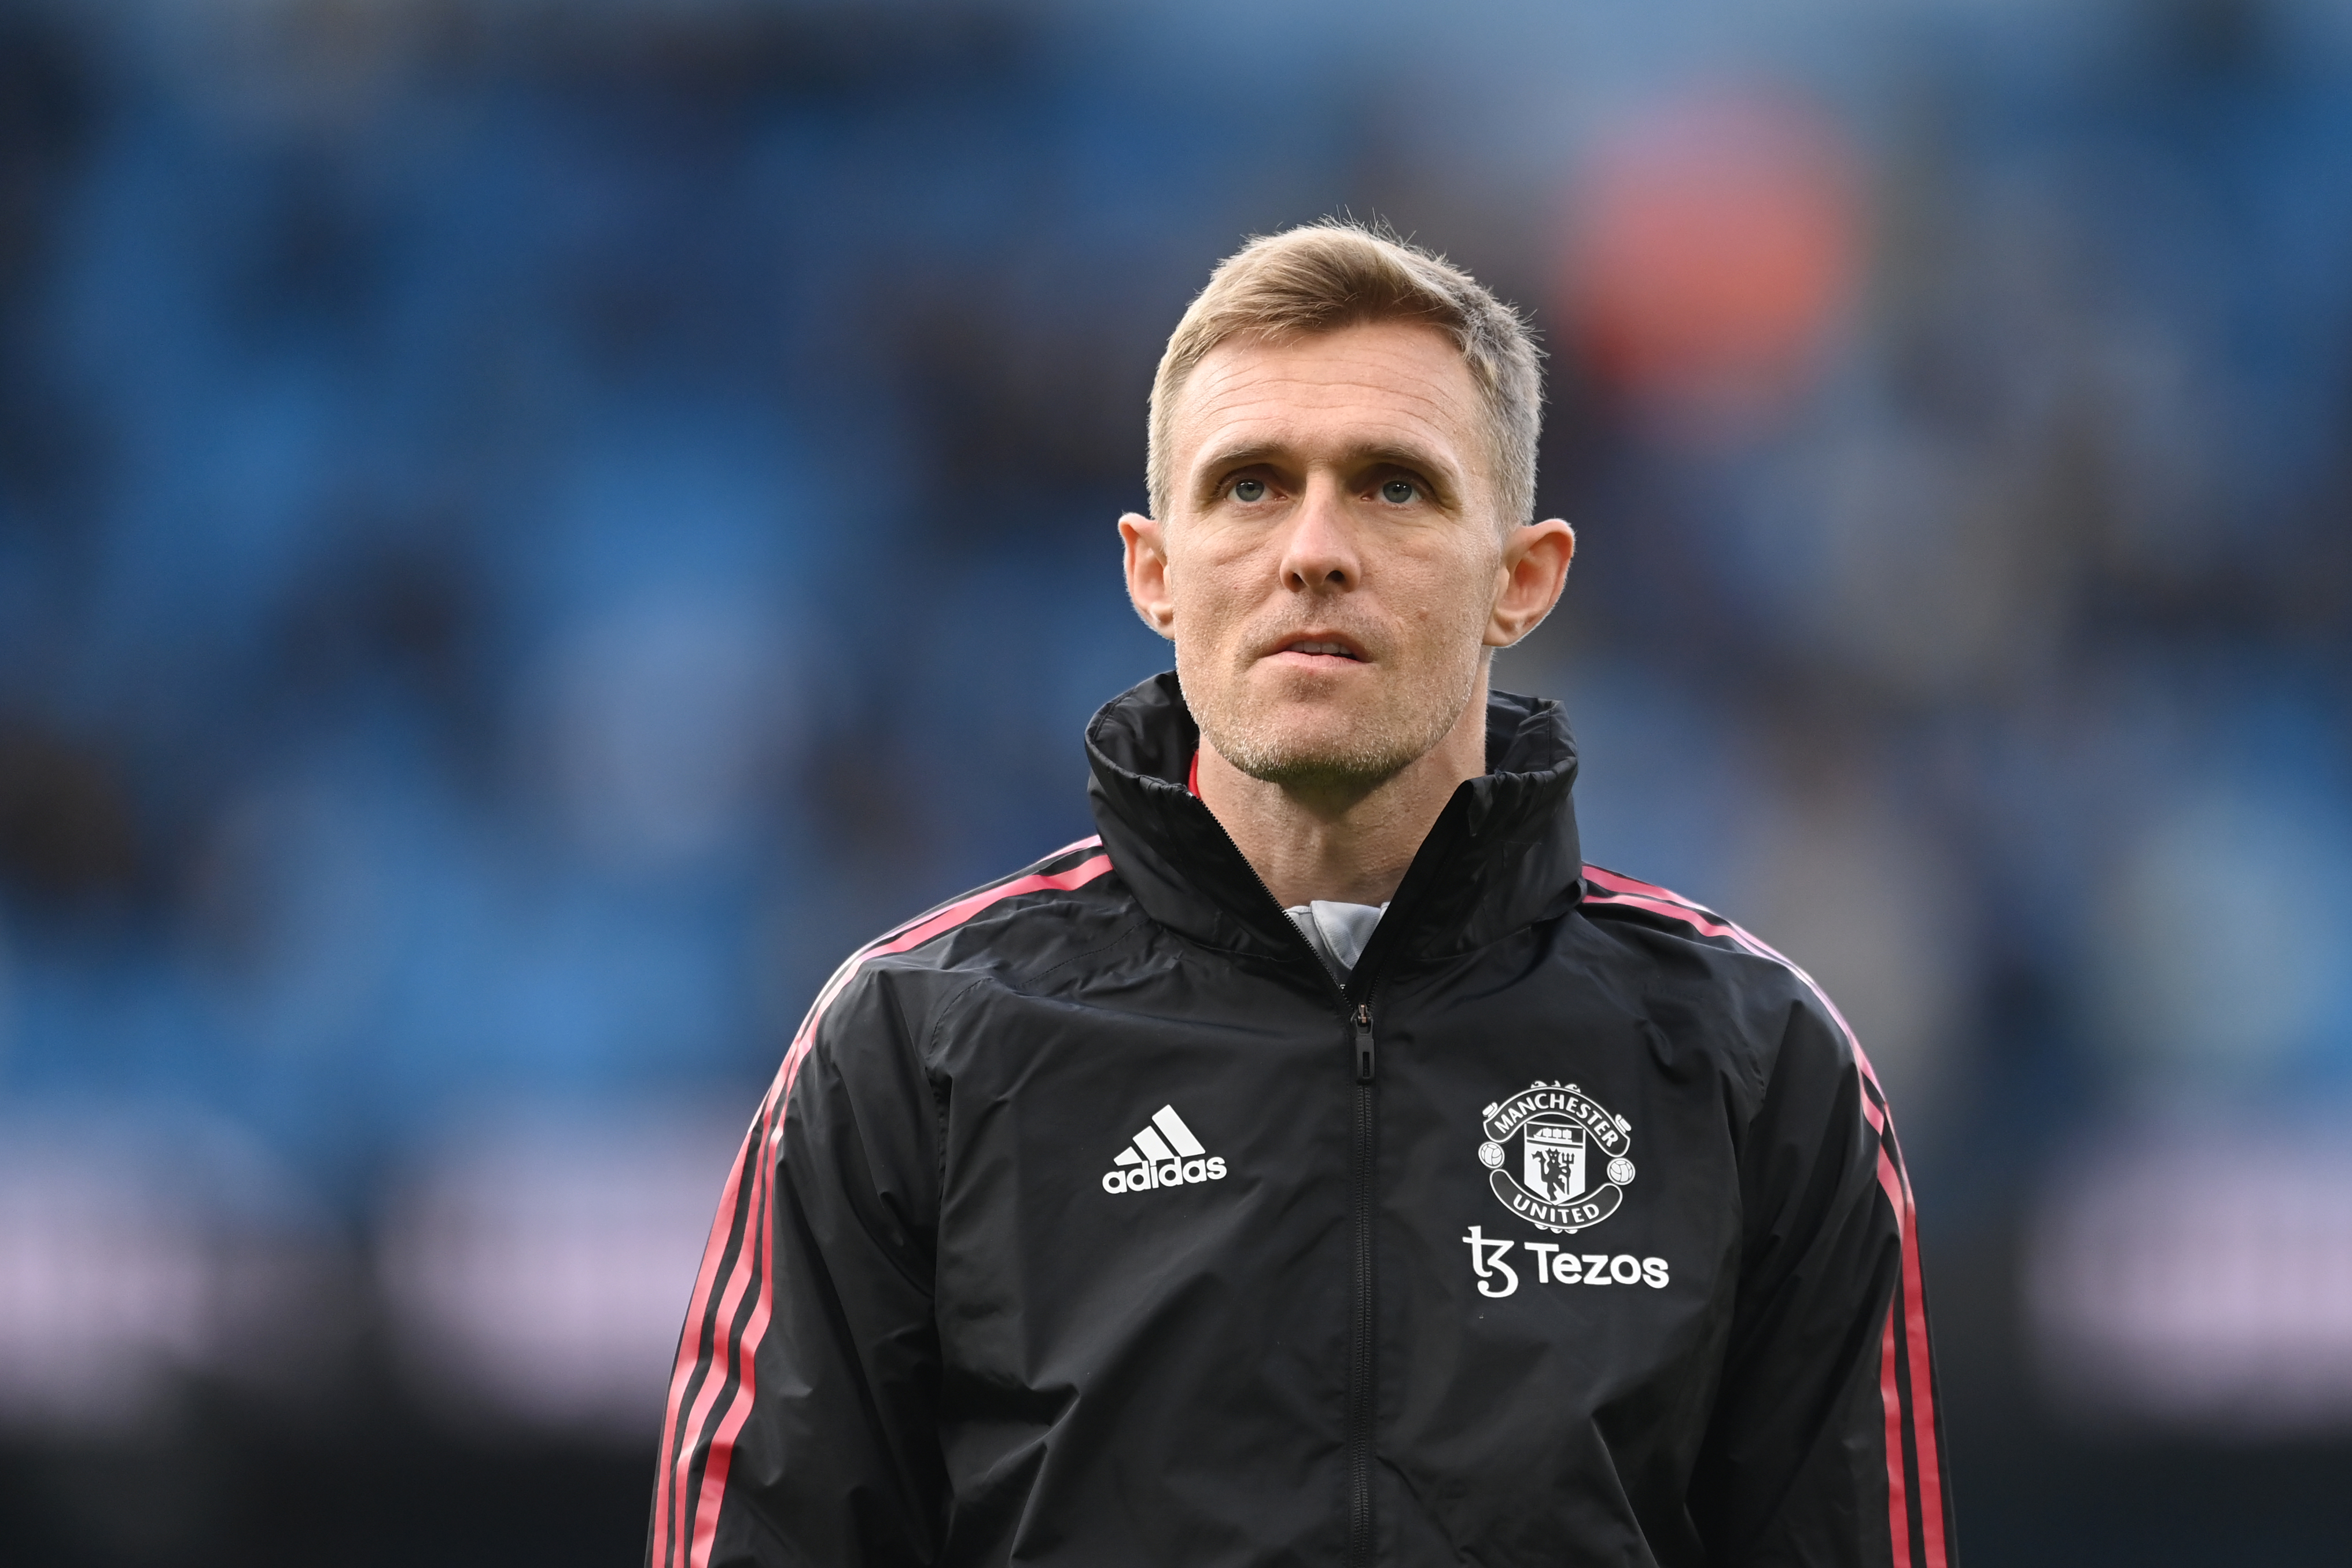 Darren Fletcher's sons have some big shoes to fill at Manchester United. 